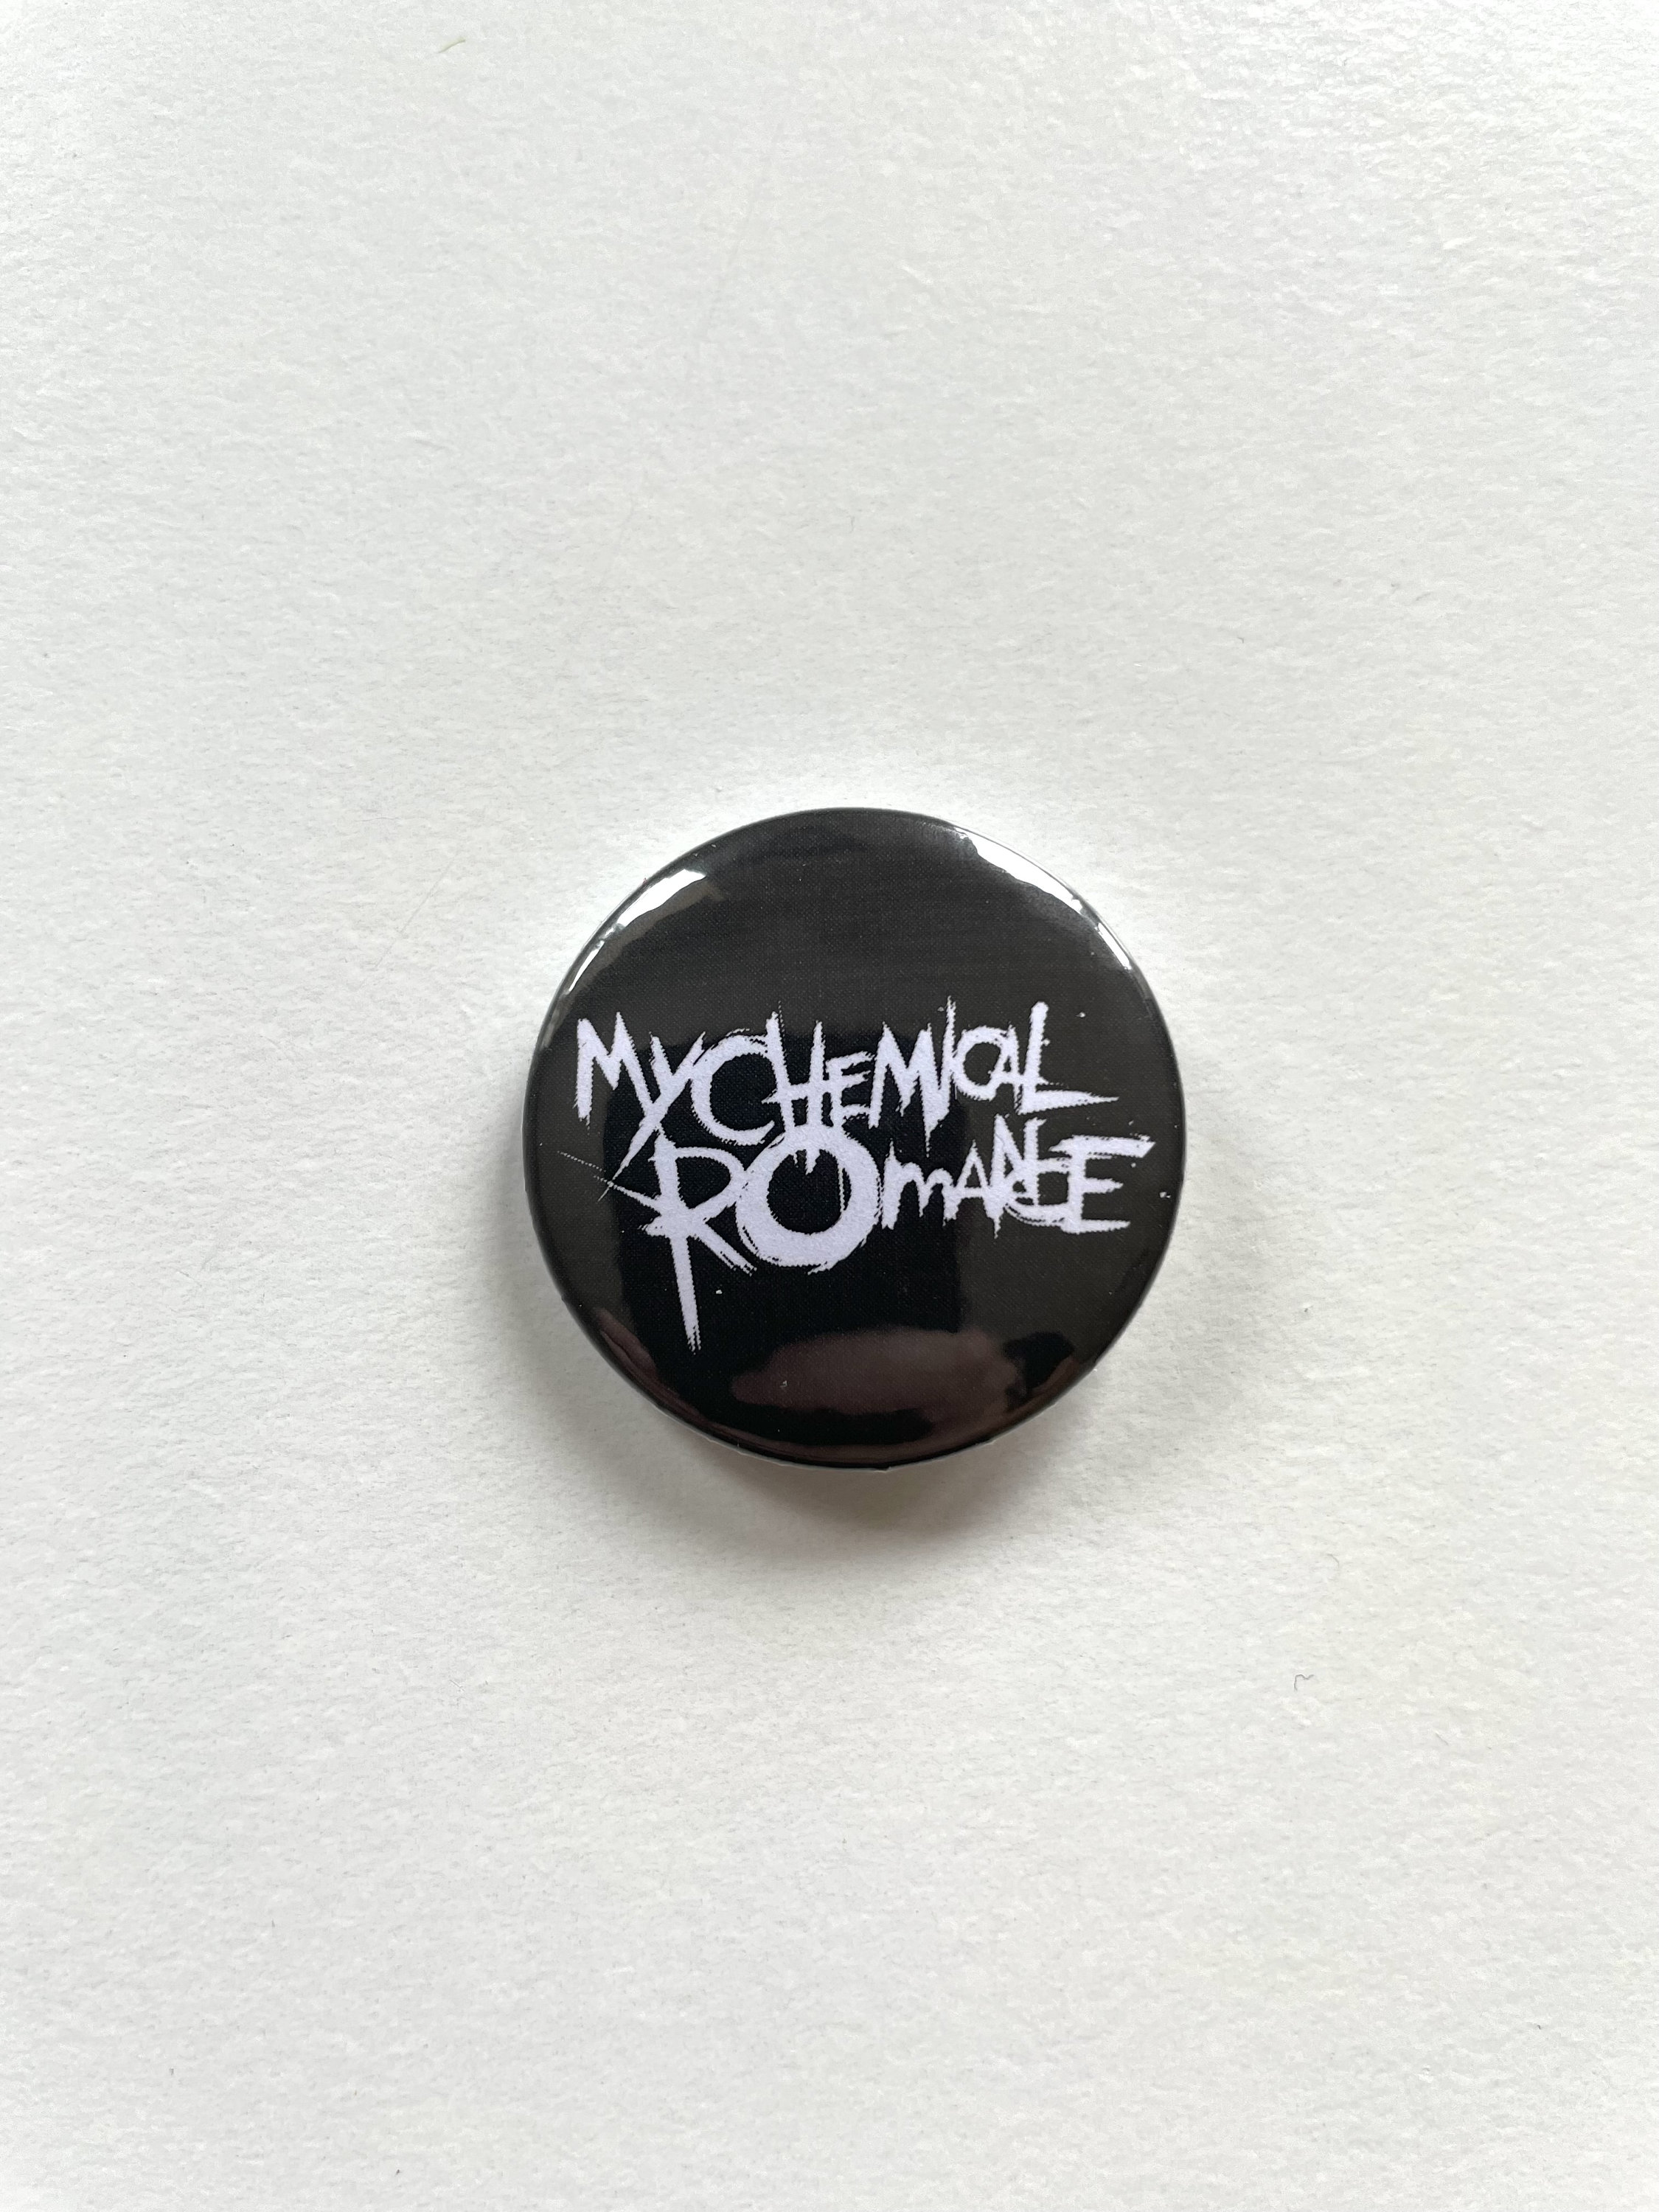 EMO KID Pins Pinback Button Poser and Proud Scene Punk Mall Goth Badge Hot  Topic Nostalgia My Chemical Romance MCR -  Norway